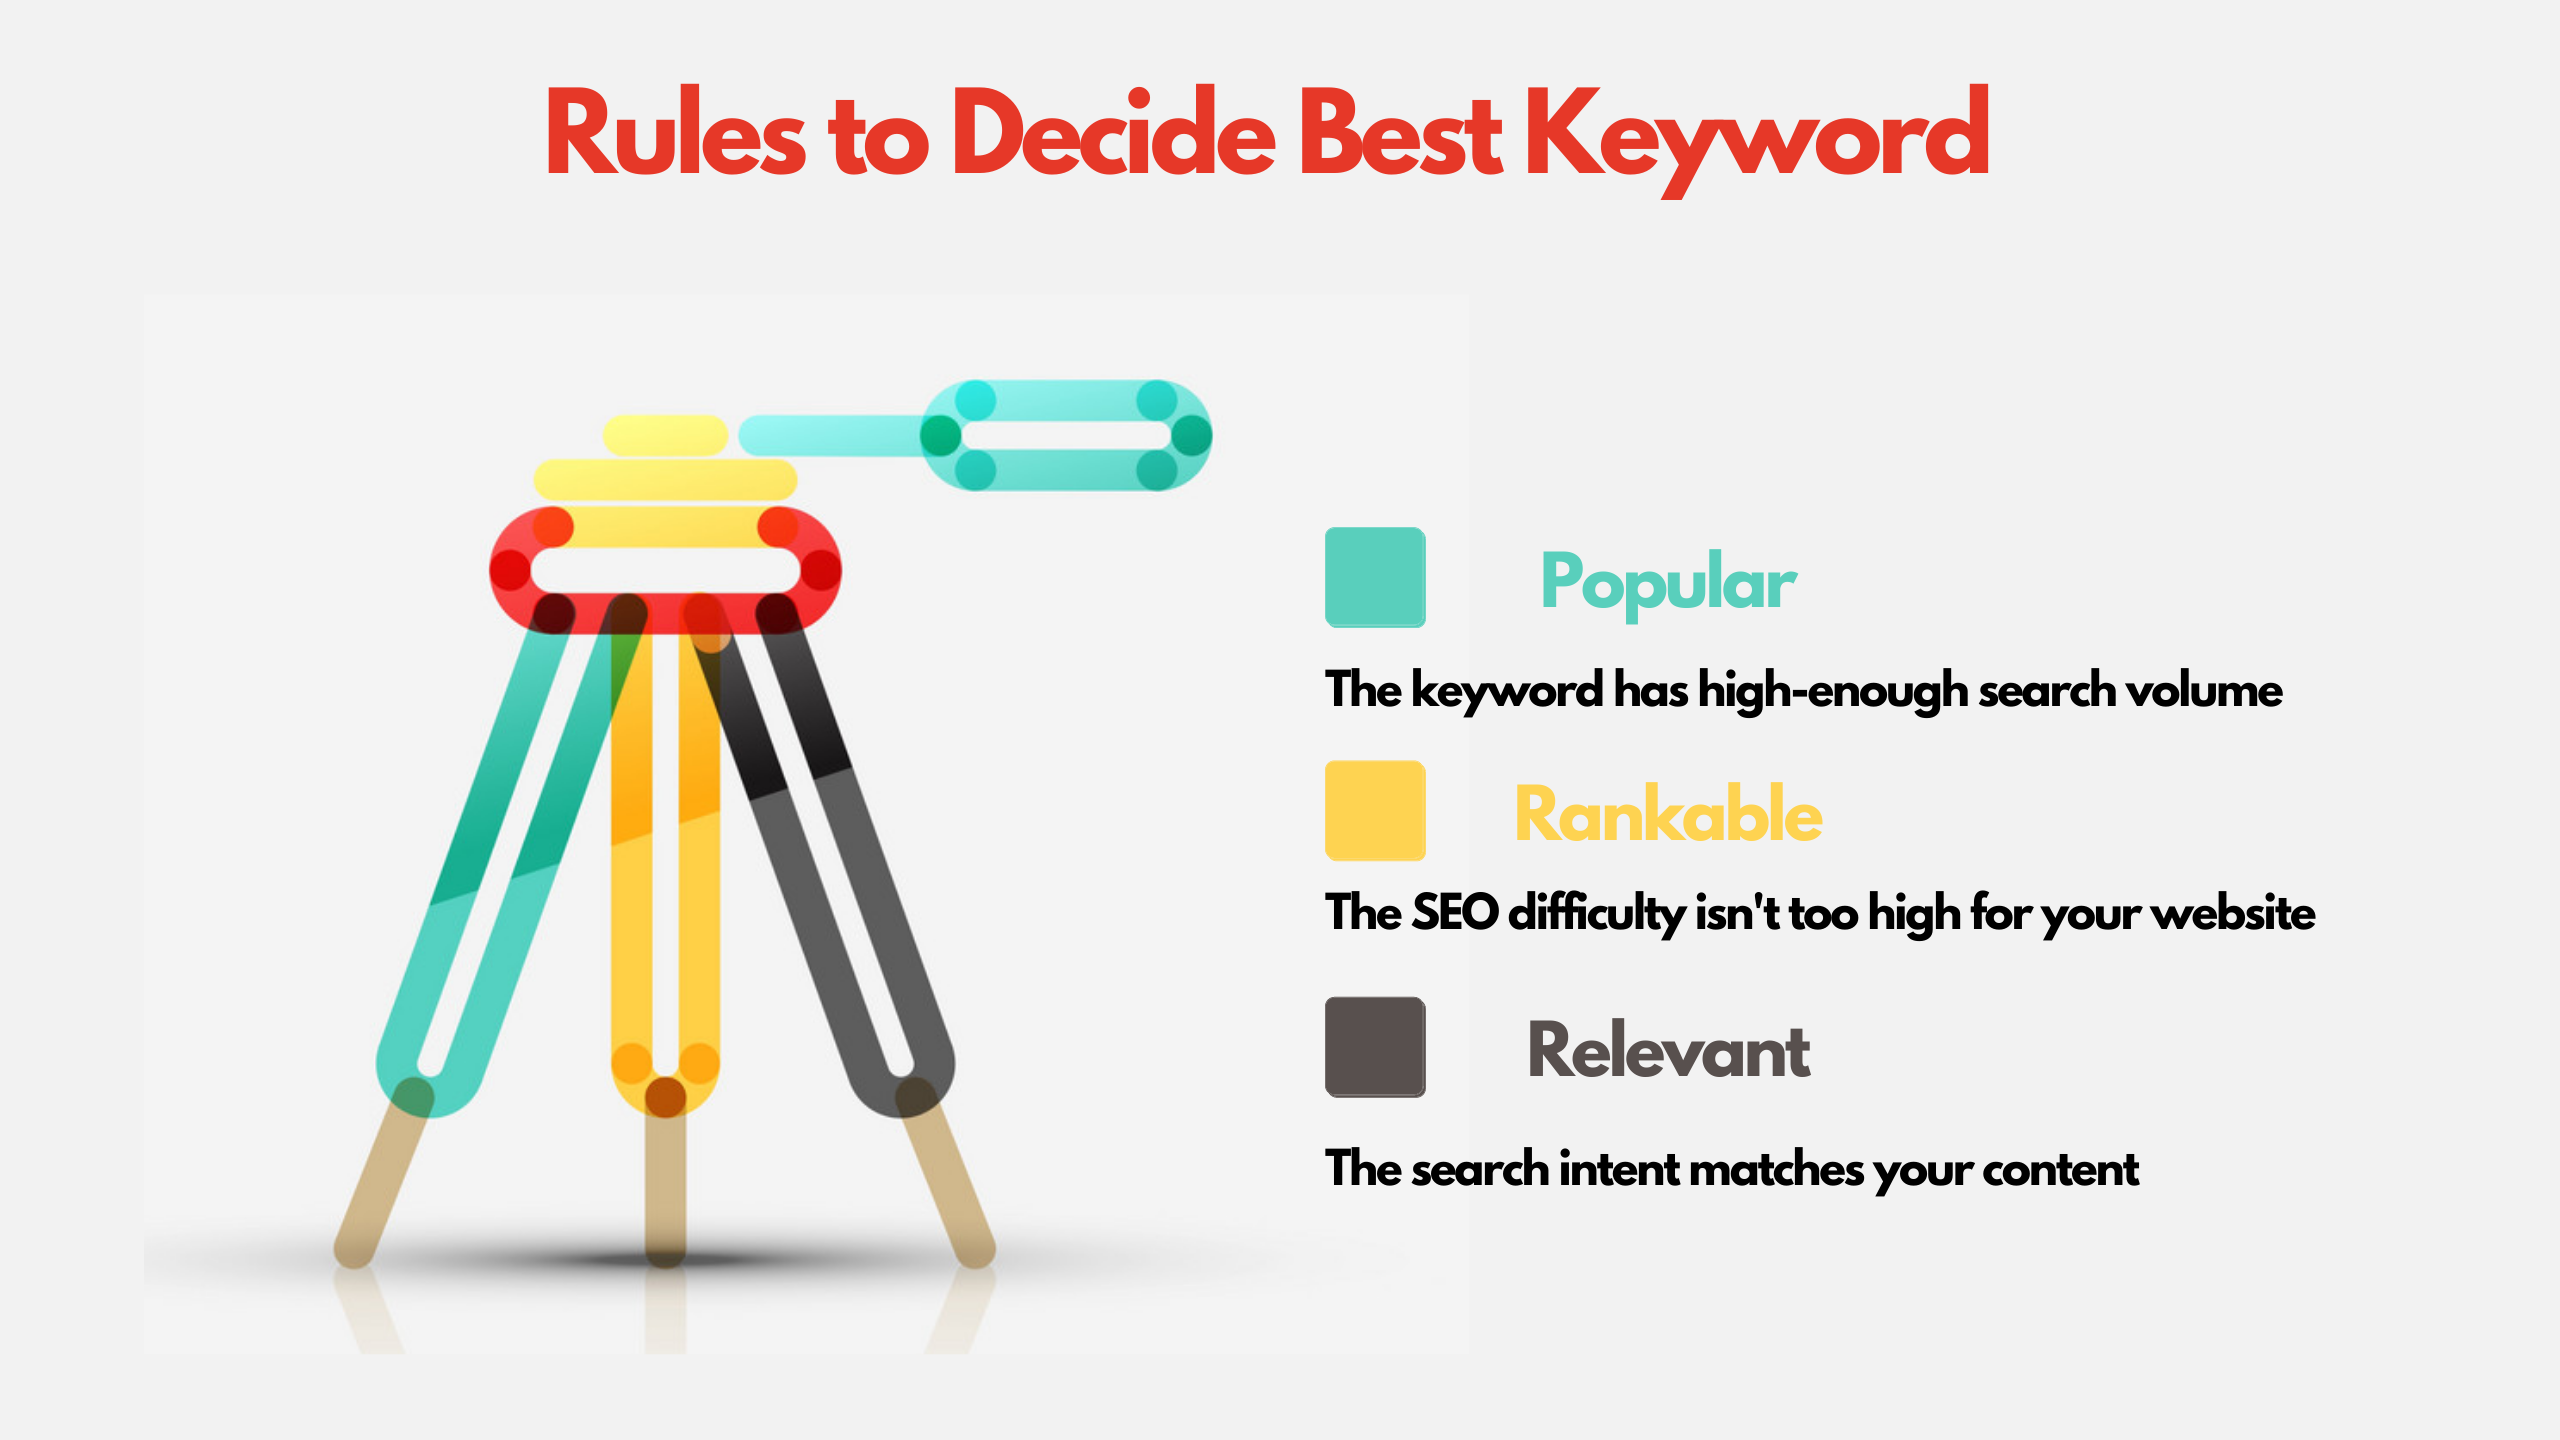 Rules to decide the Best Keywords